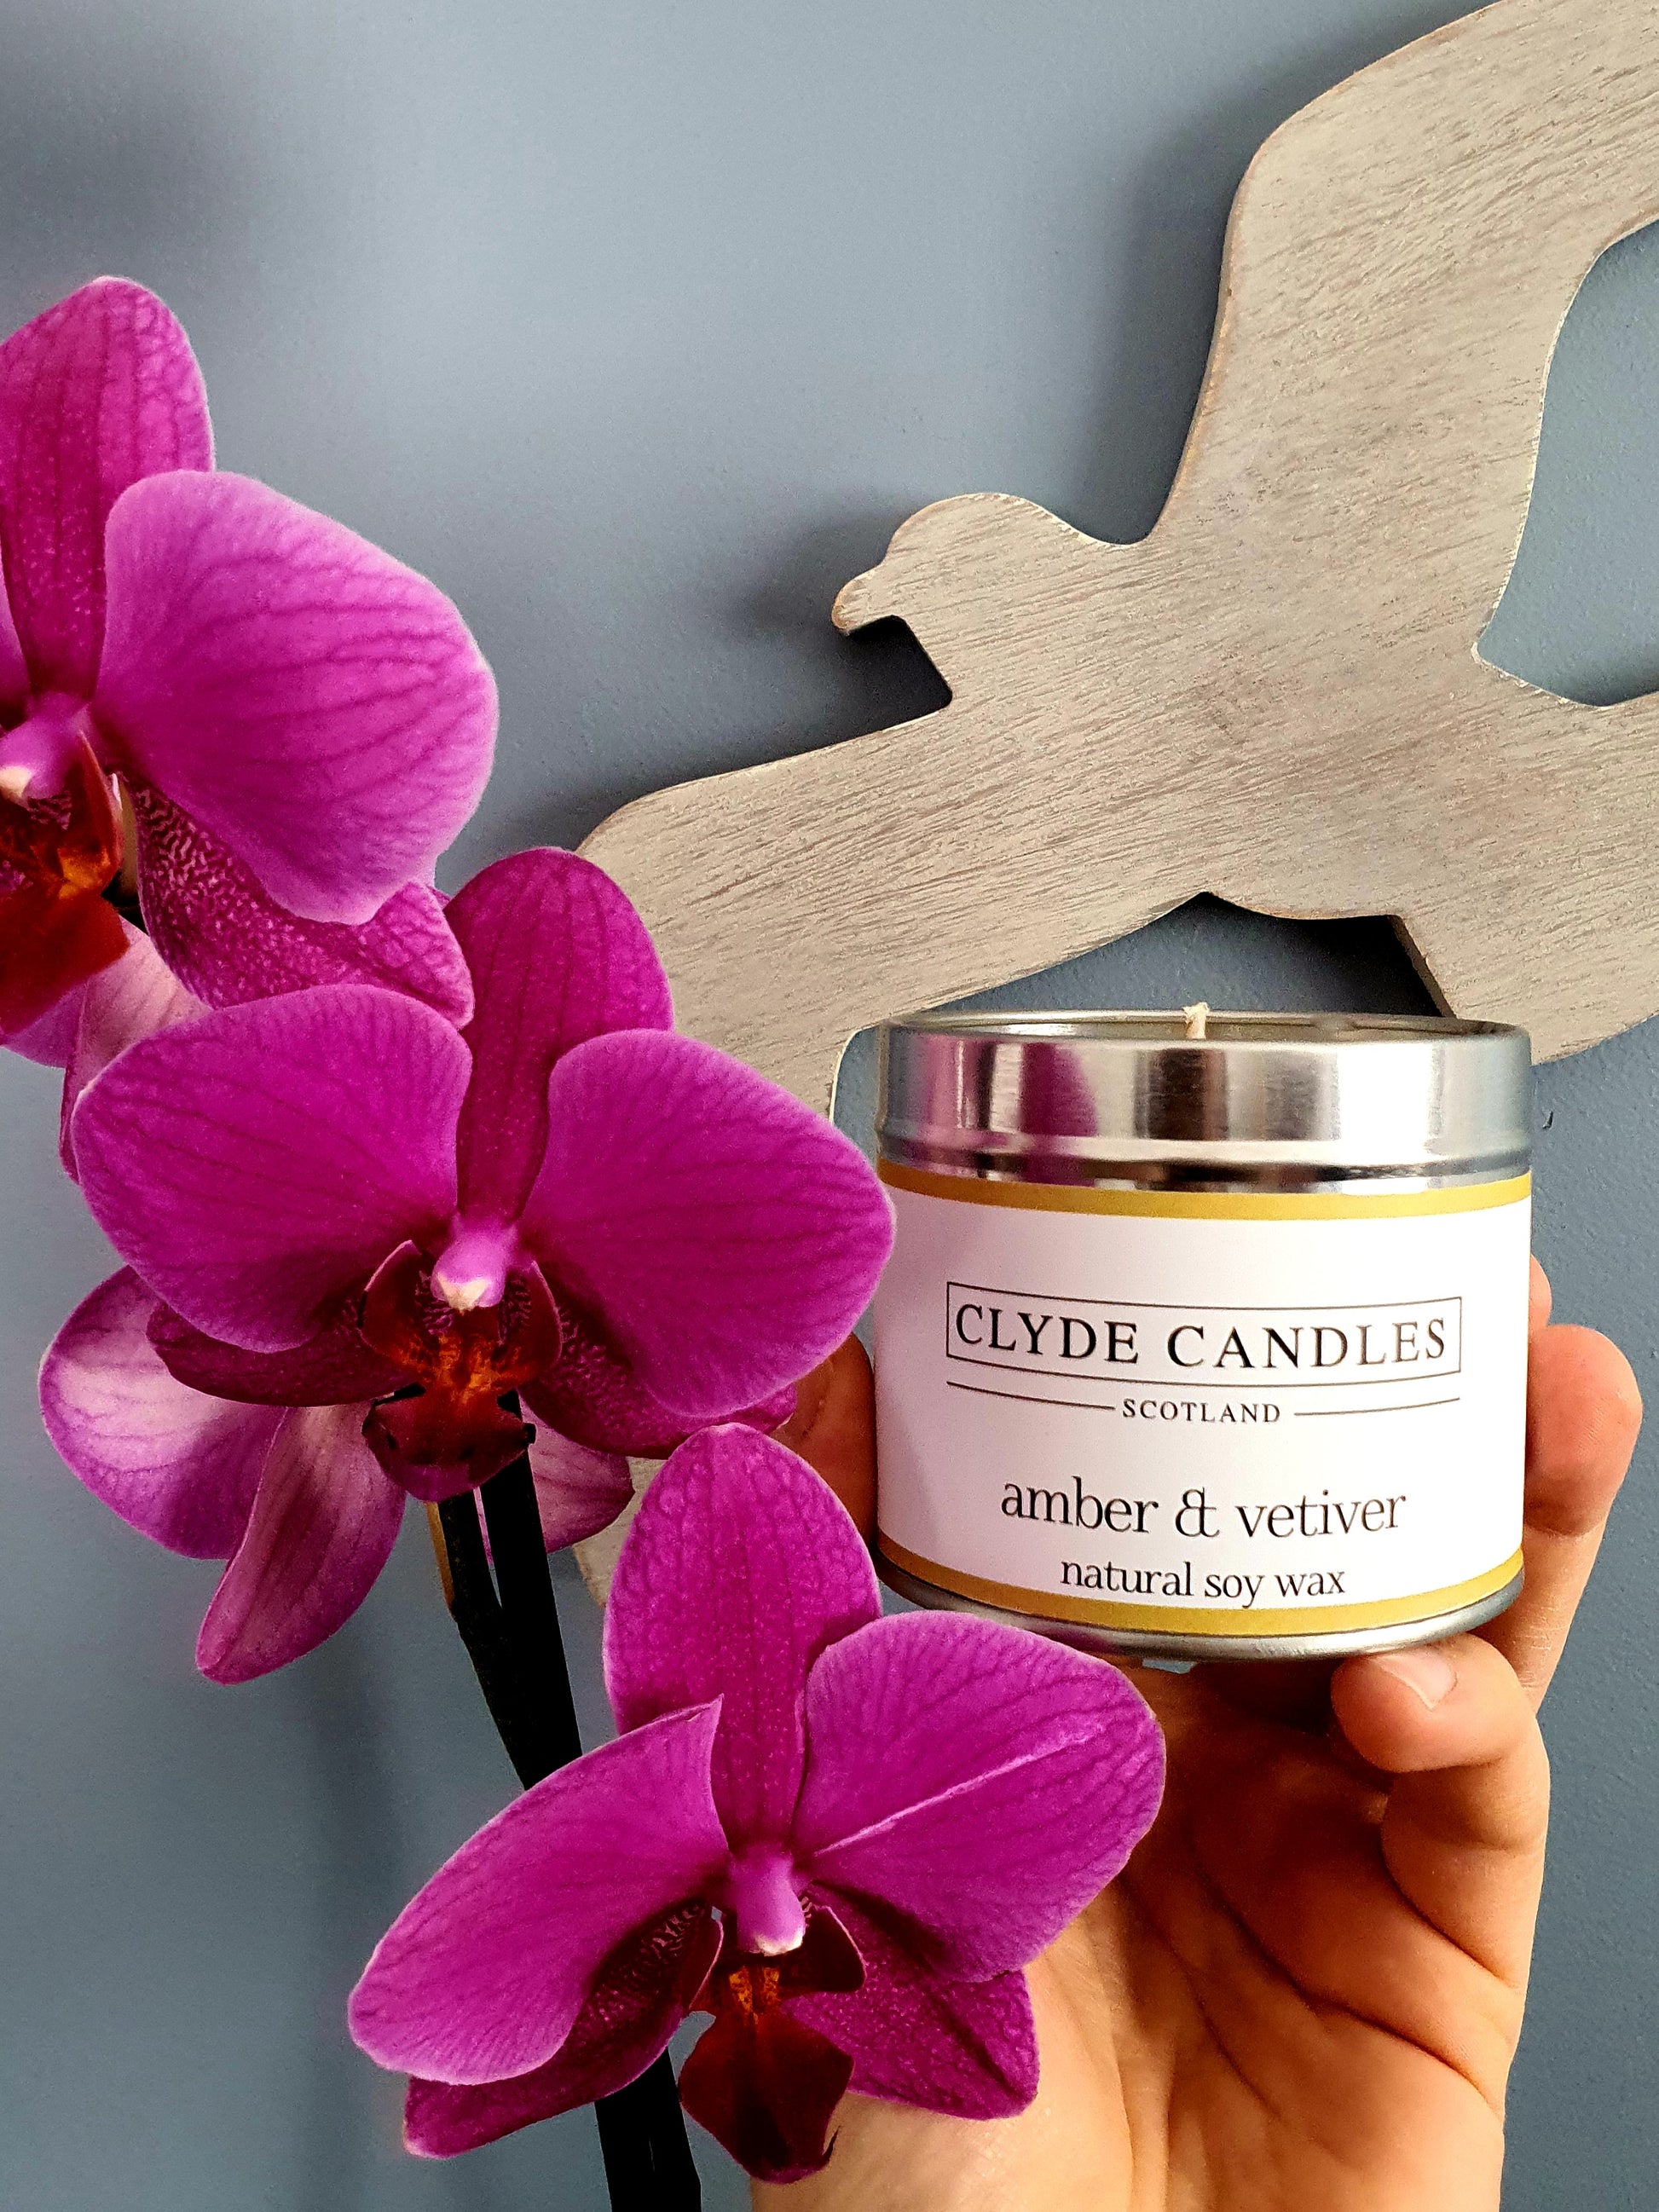 Amber & Vetiver Scented Candle Tin, Luxury Natural Soy wax, Scottish Candles, Clyde Candles